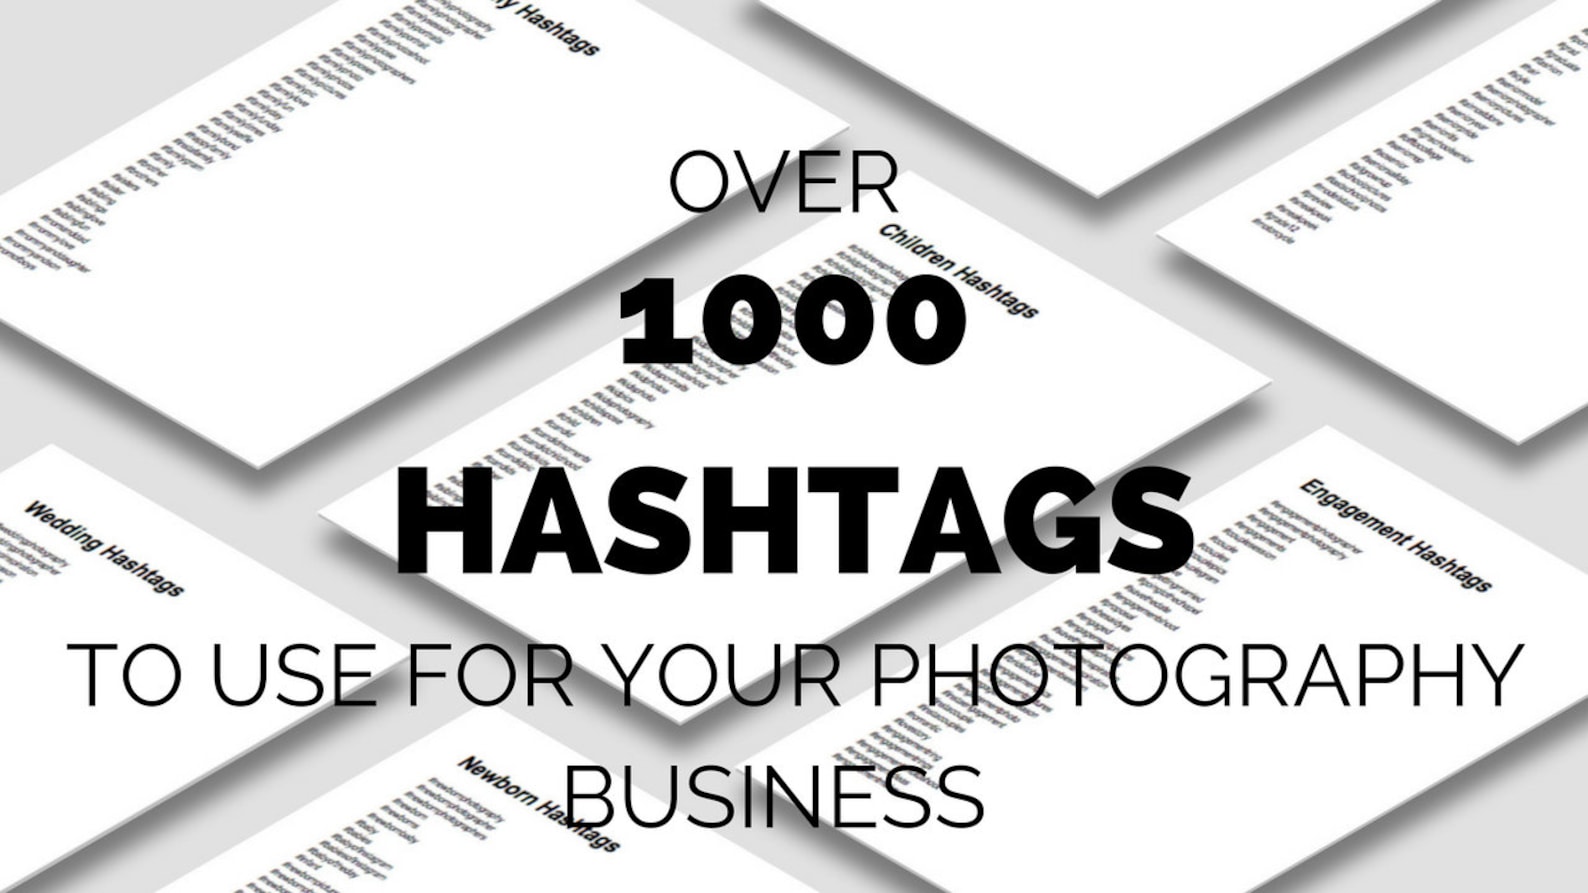 Copy and Paste Instagram Hashtags for Photographers Etsy